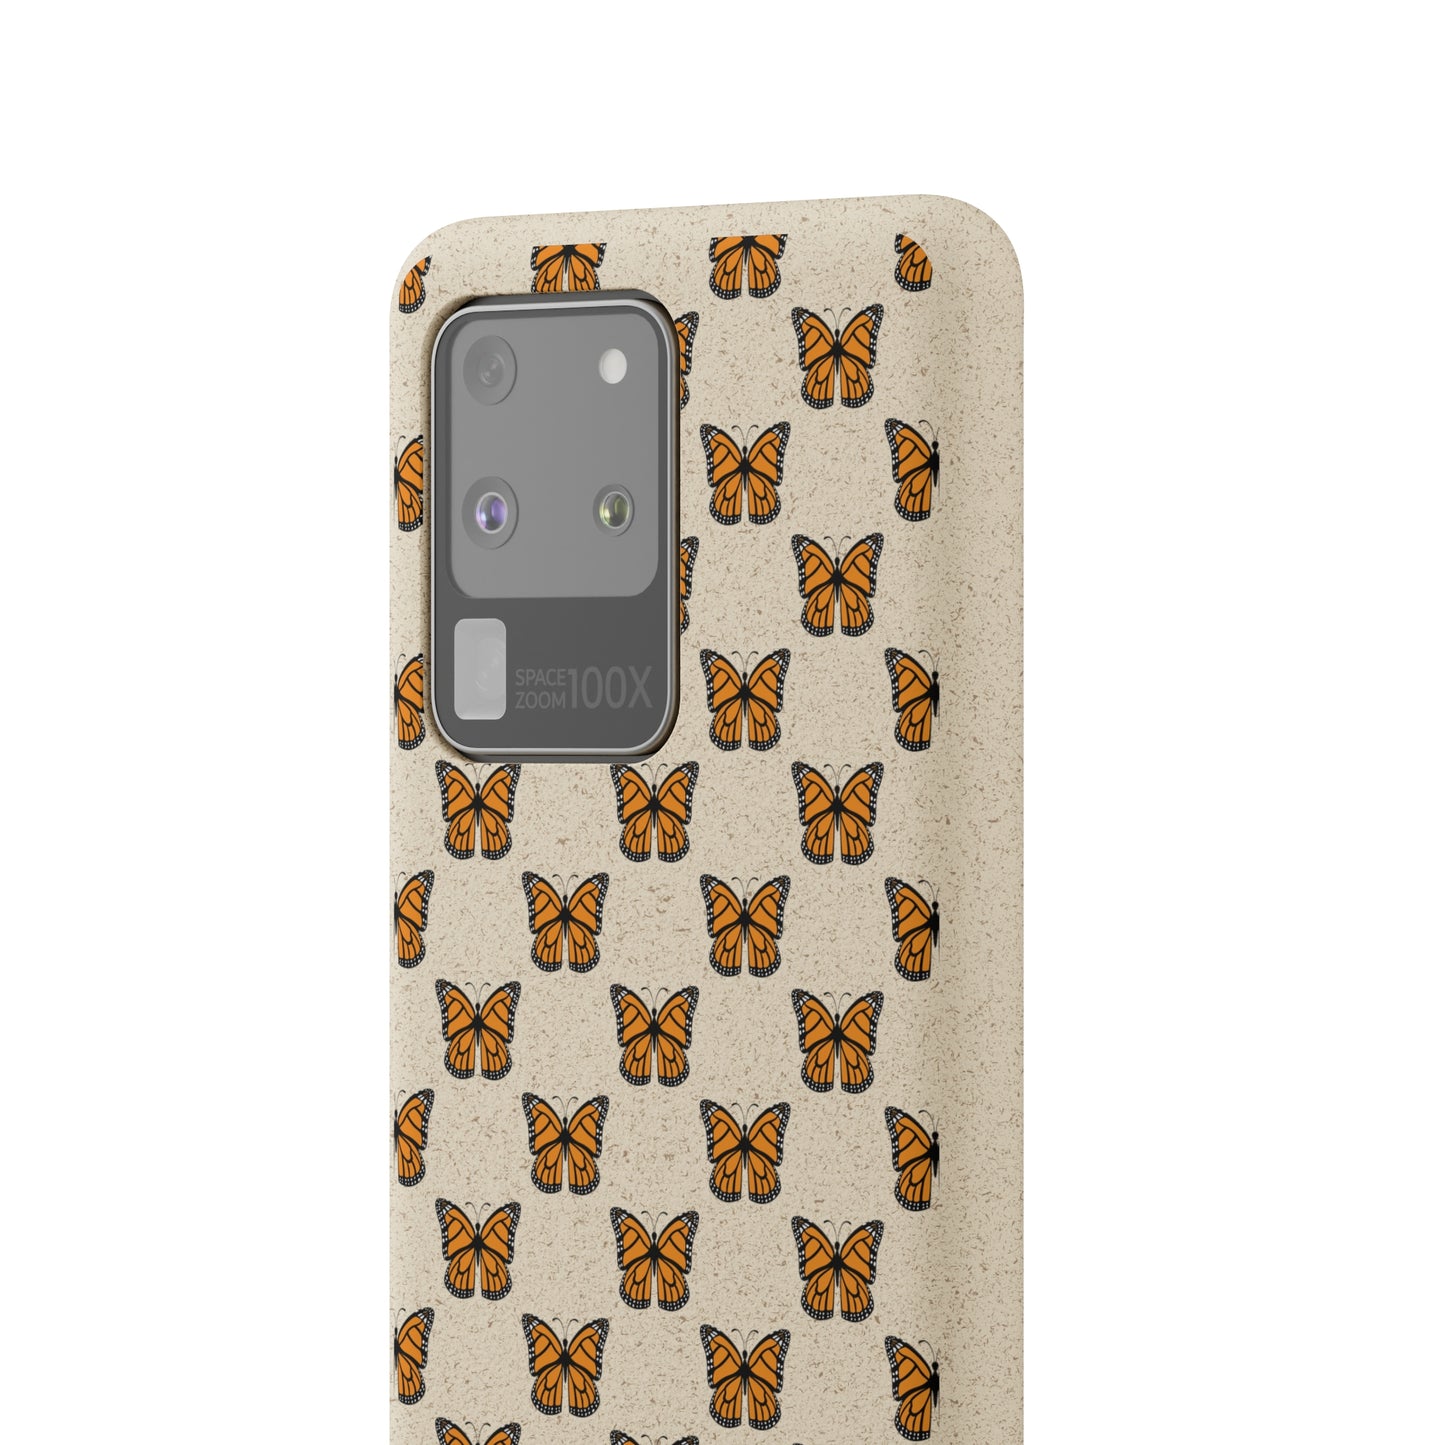 Monarch Butterfly Biodegradable Phone Case: A Fashionable and Eco-Friendly Accessory